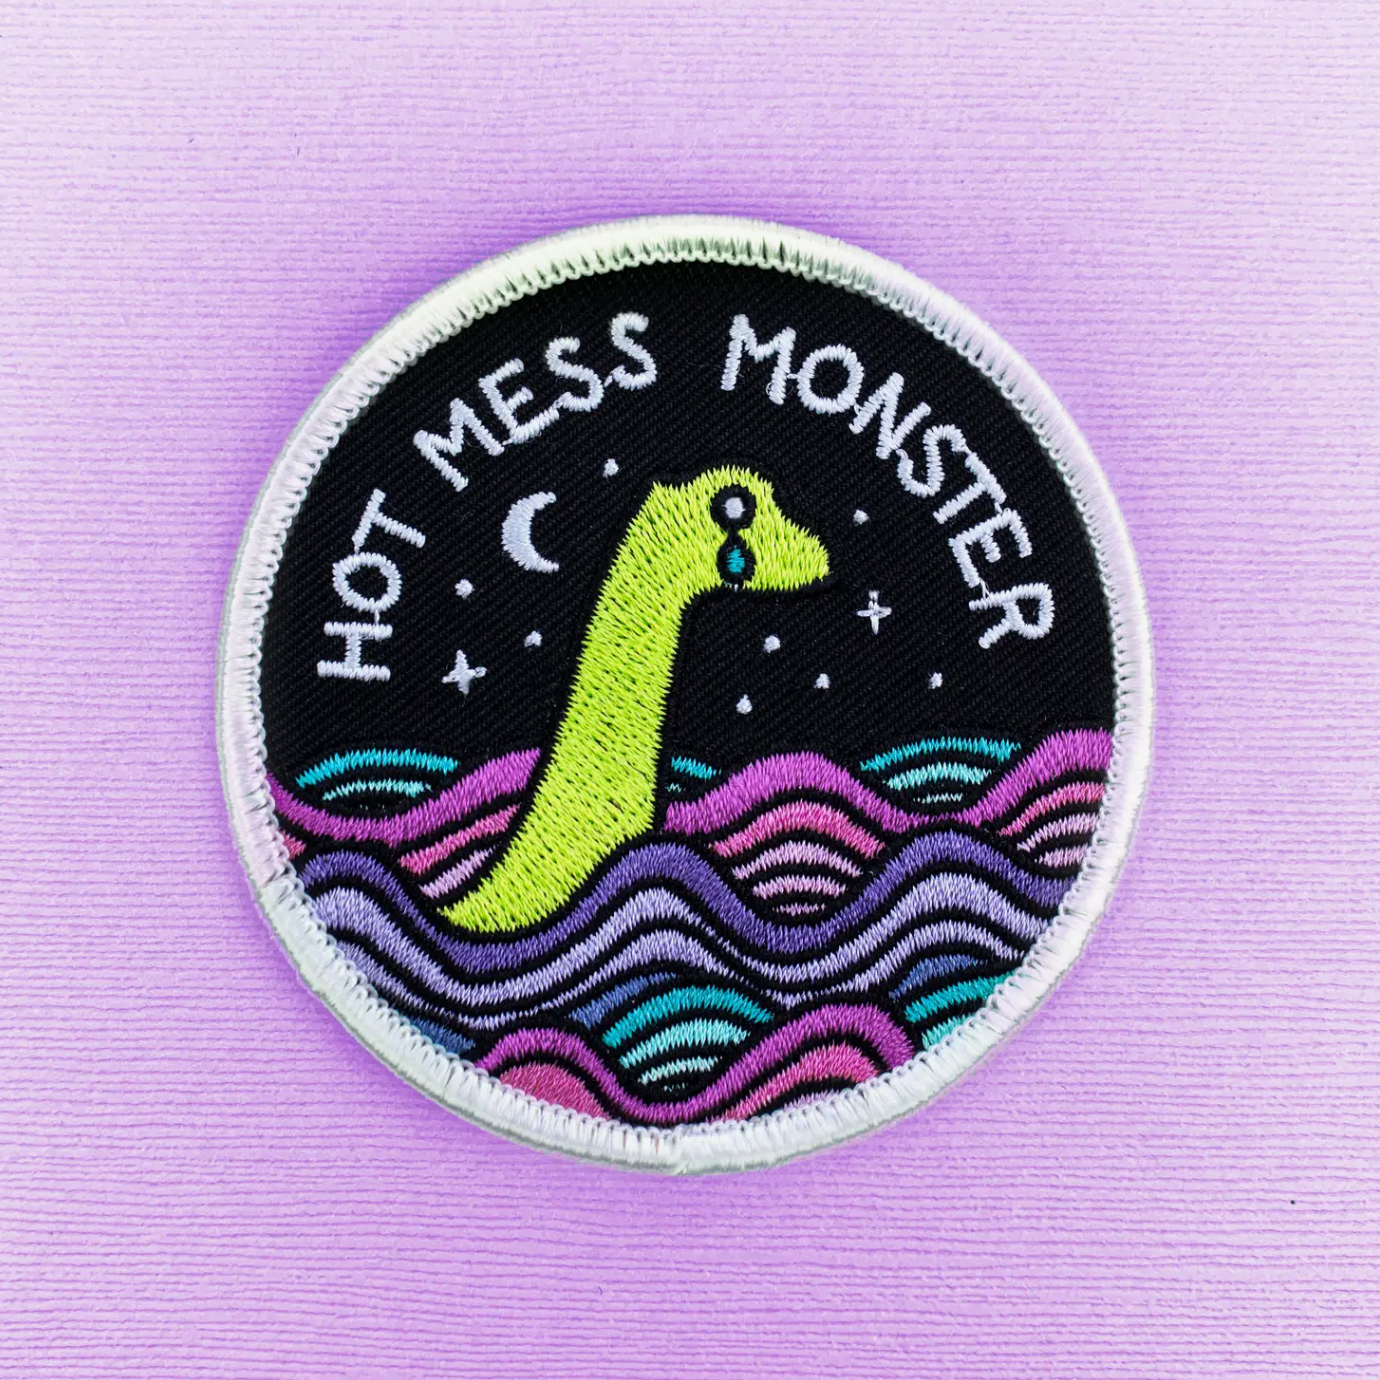 hot mess monster patch